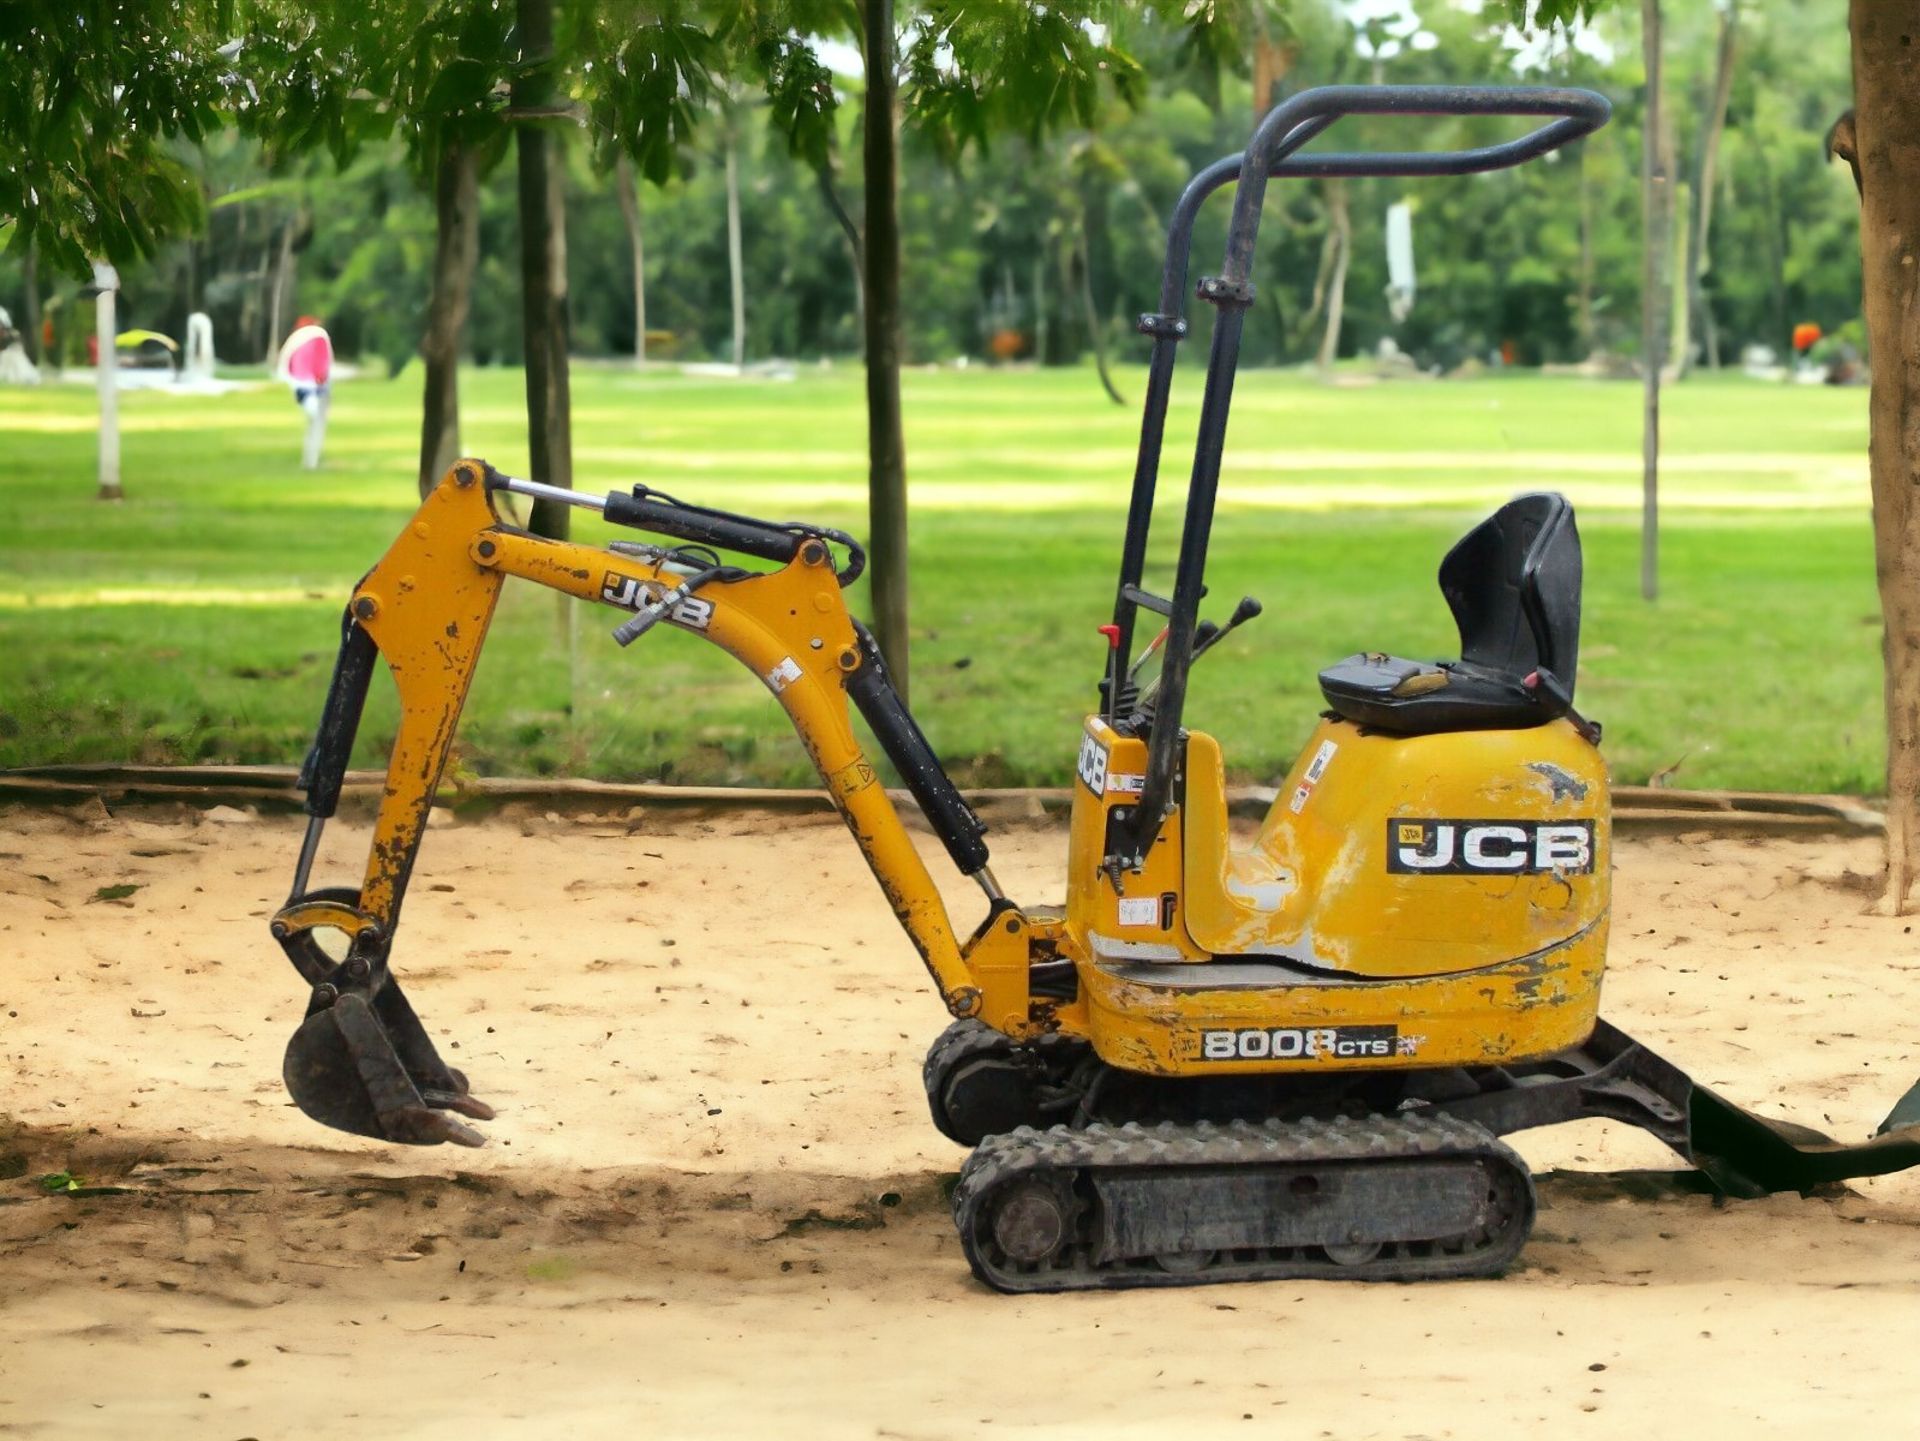 UNLOCK PRECISION AND POWER WITH THE JCB 8008 EXCAVATOR